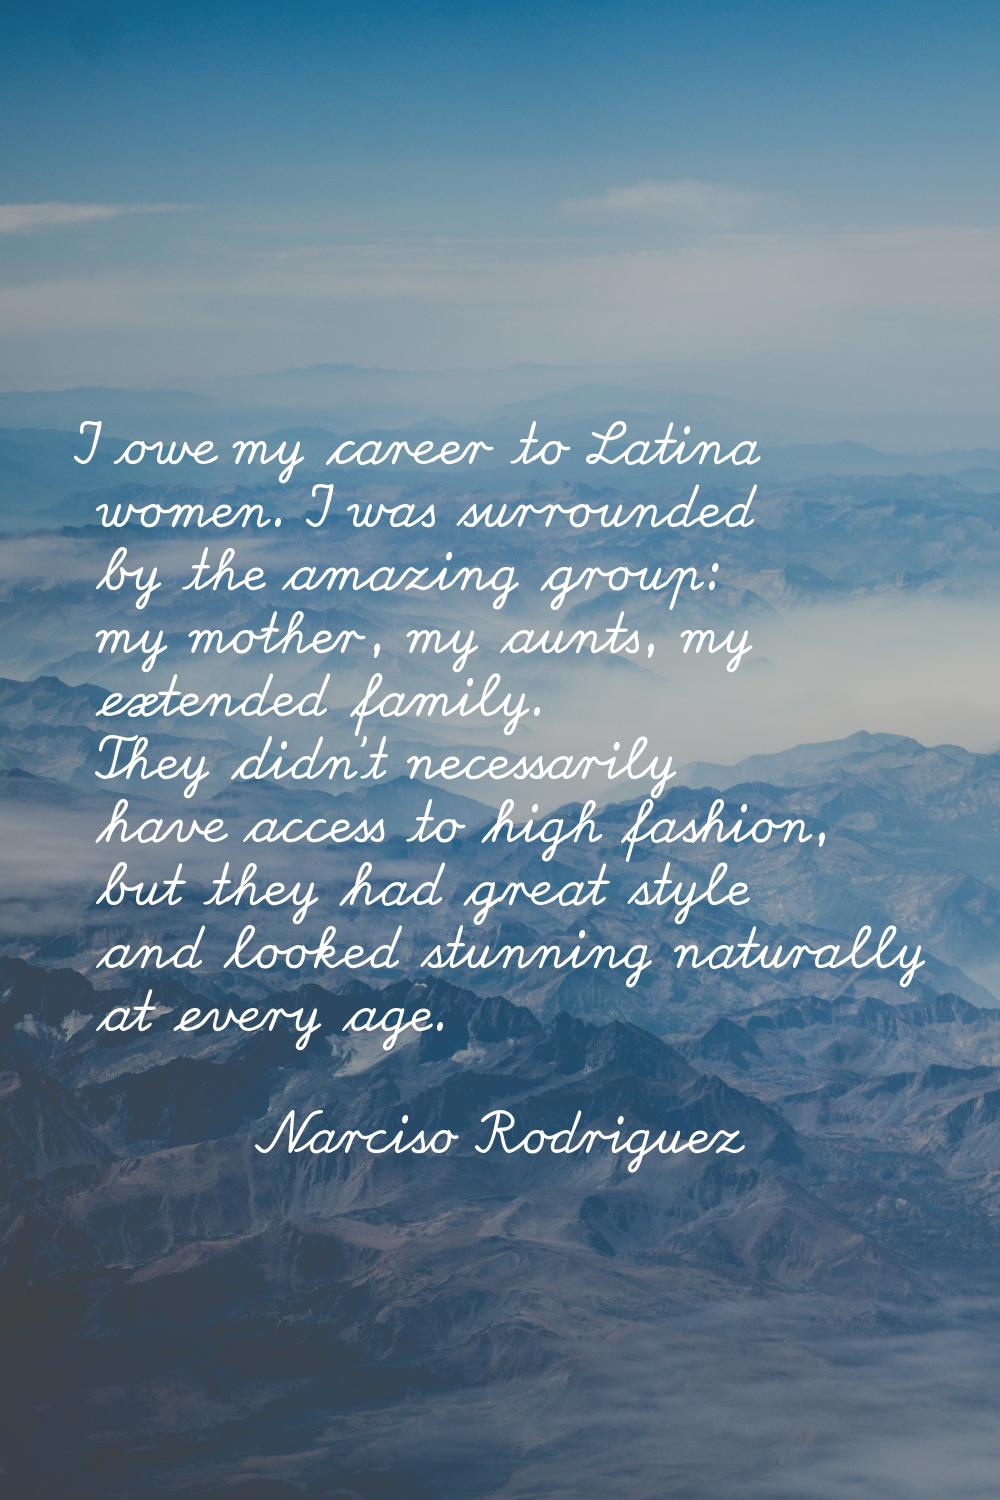 I owe my career to Latina women. I was surrounded by the amazing group: my mother, my aunts, my ext